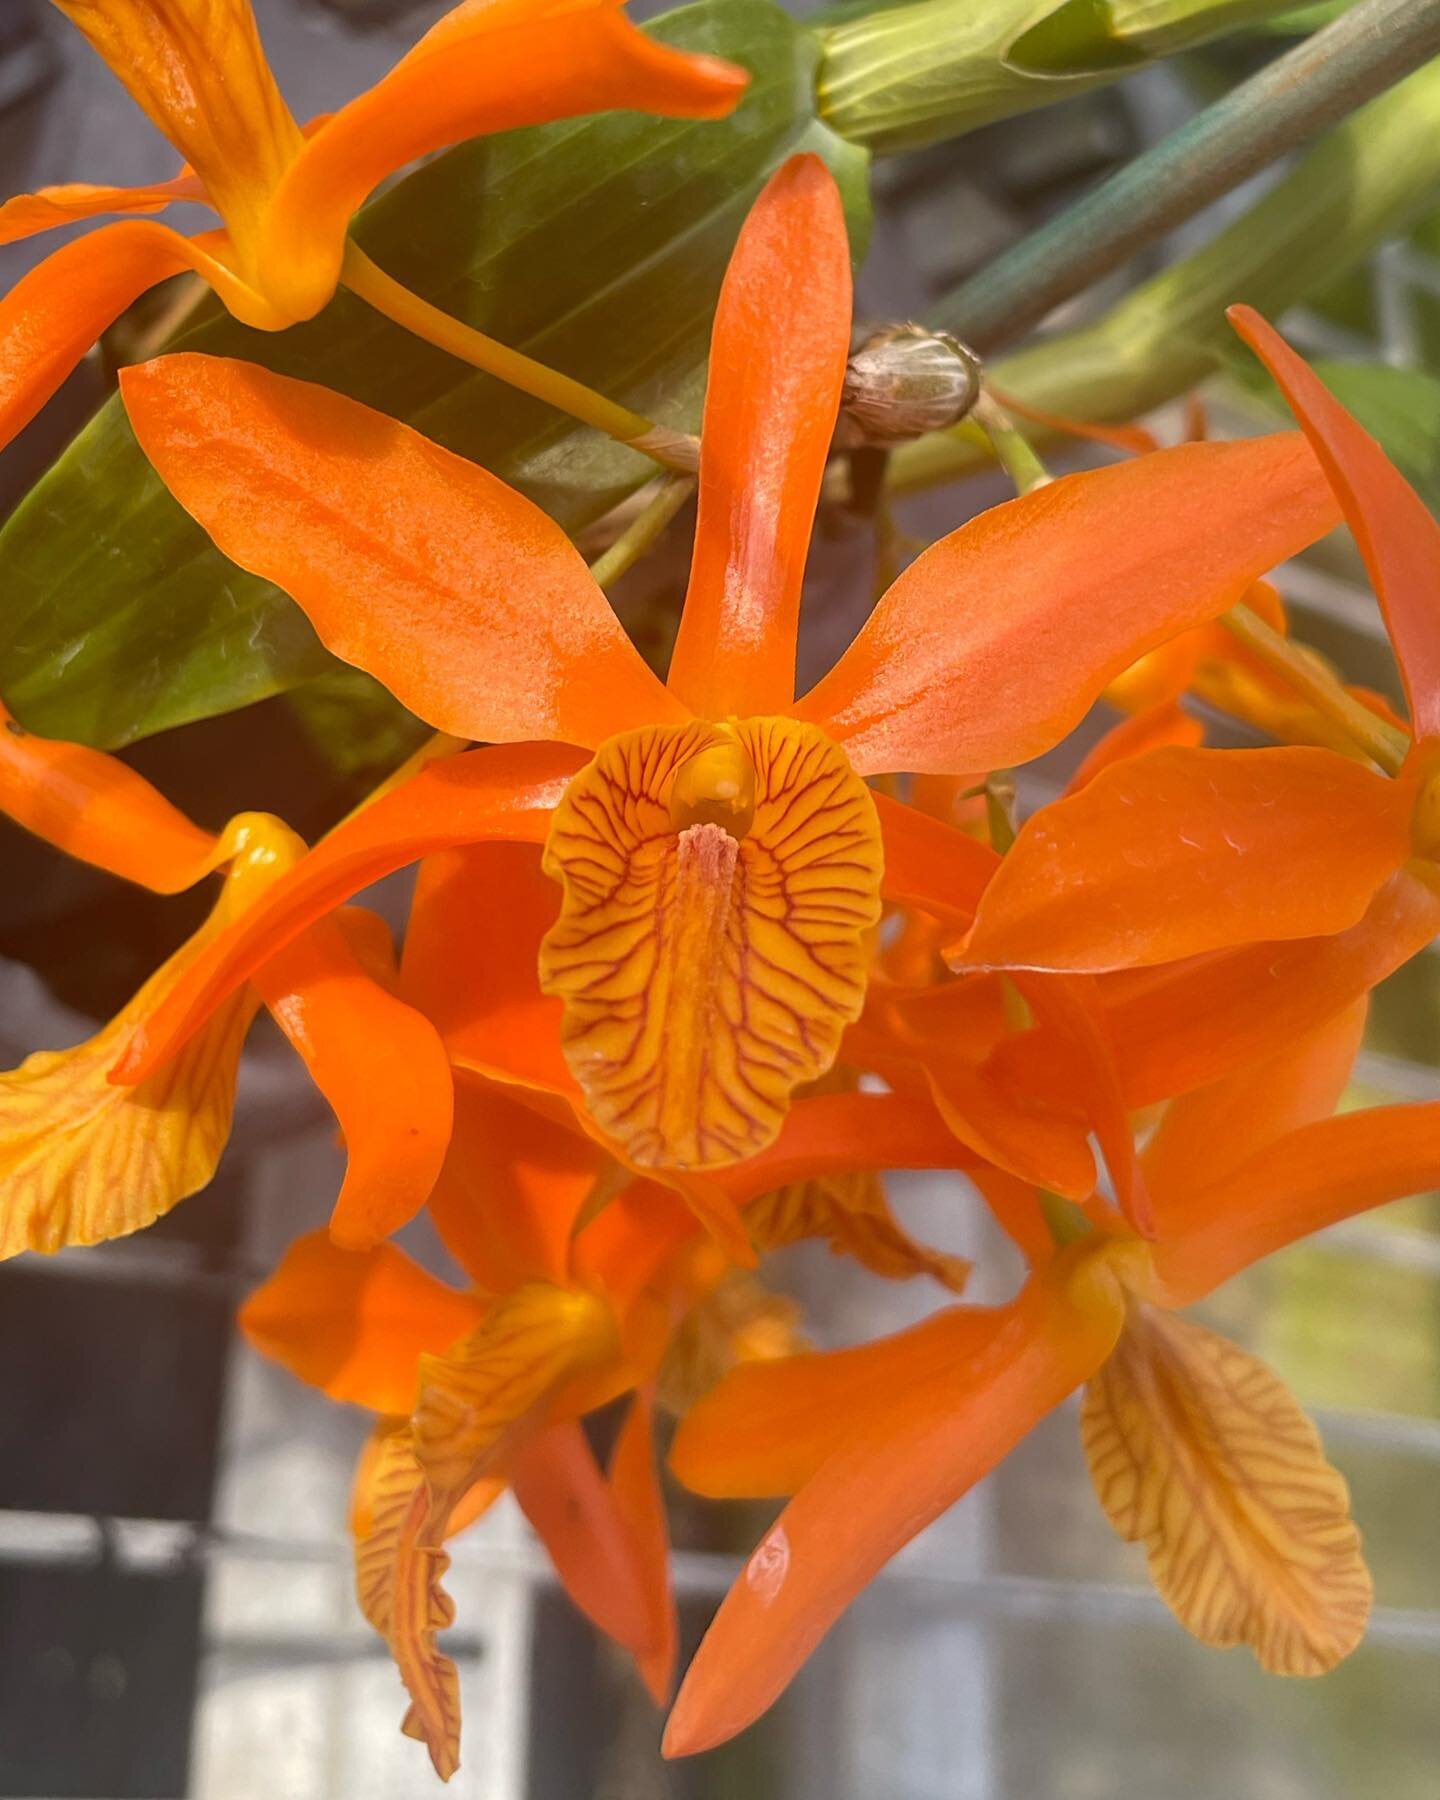 Orange you glad it&rsquo;s the weekend? We sure are! If you were a fan of our story this morning, you&rsquo;ll love these newly listed Den. Tangerine Stars.

#🍊🍊🍊 #orangeorchid #dendrobium #orchids #orchidoftheday #ootd #hawaiiorchids #hiloorchidf